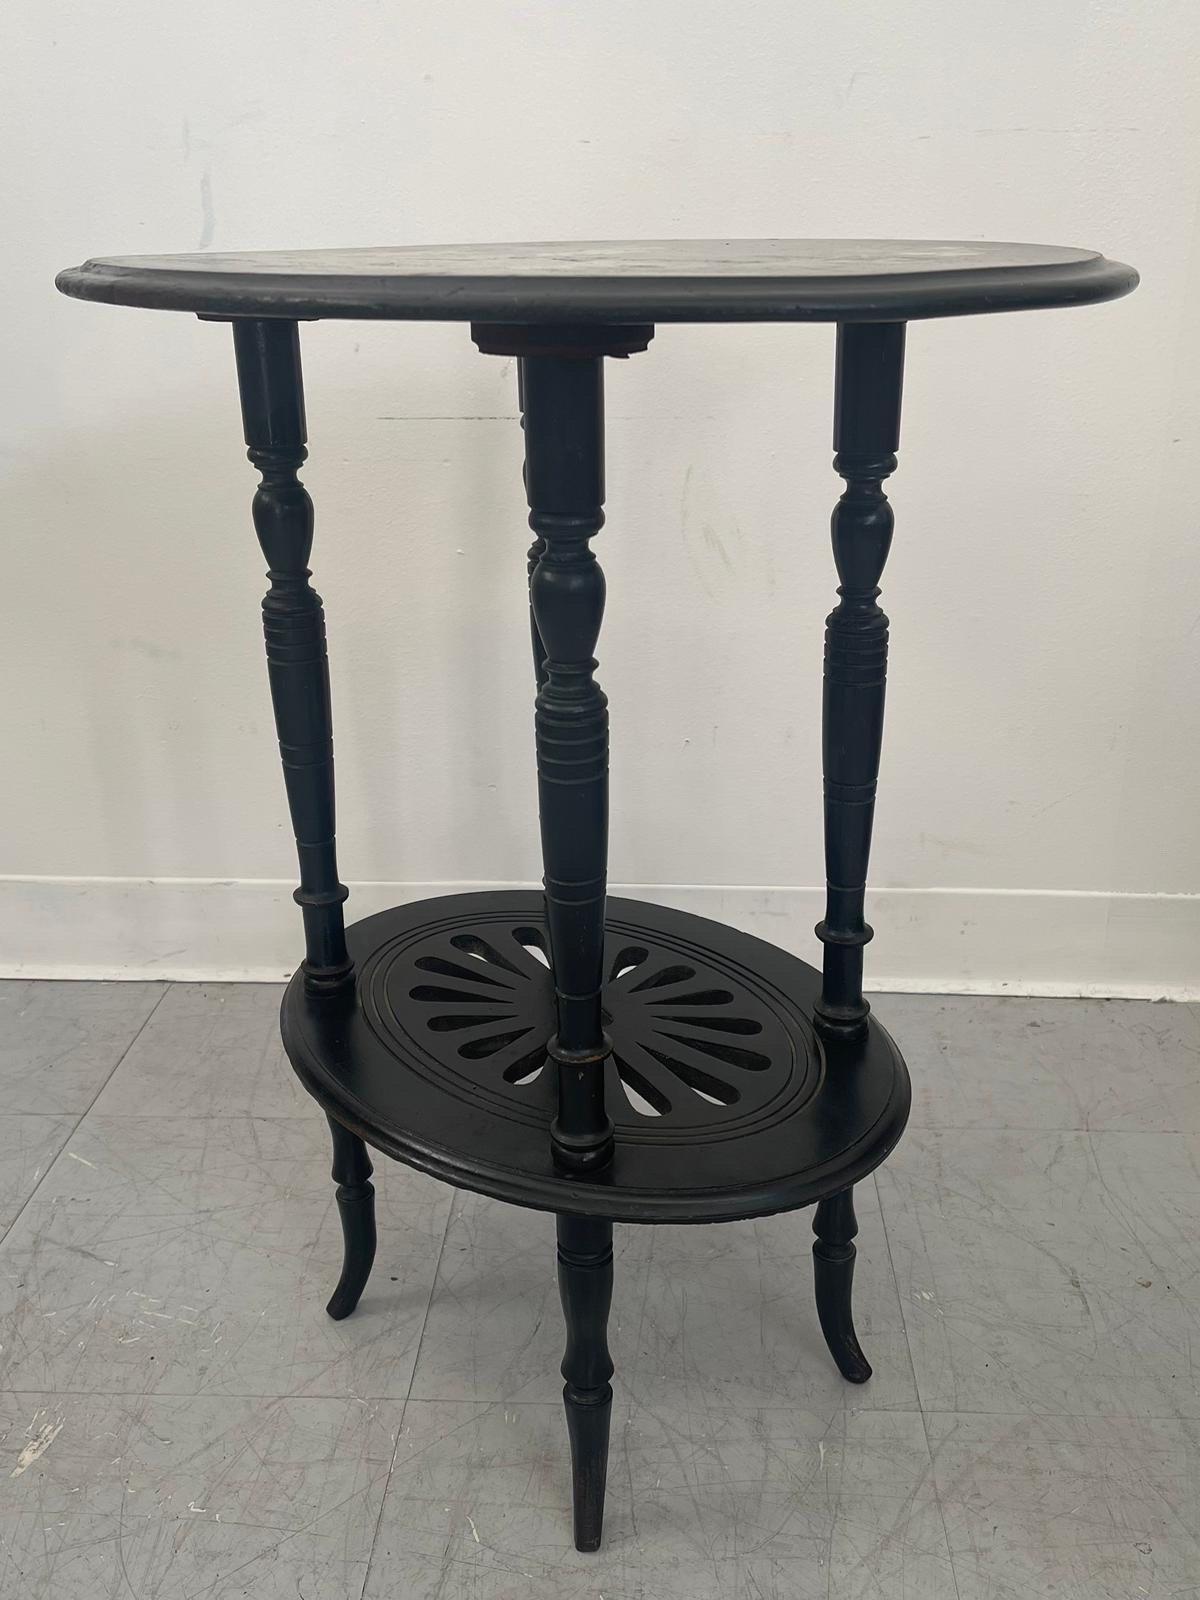 18th Century Antique 1850s Victorian Style Decorative Table Uk Import. For Sale